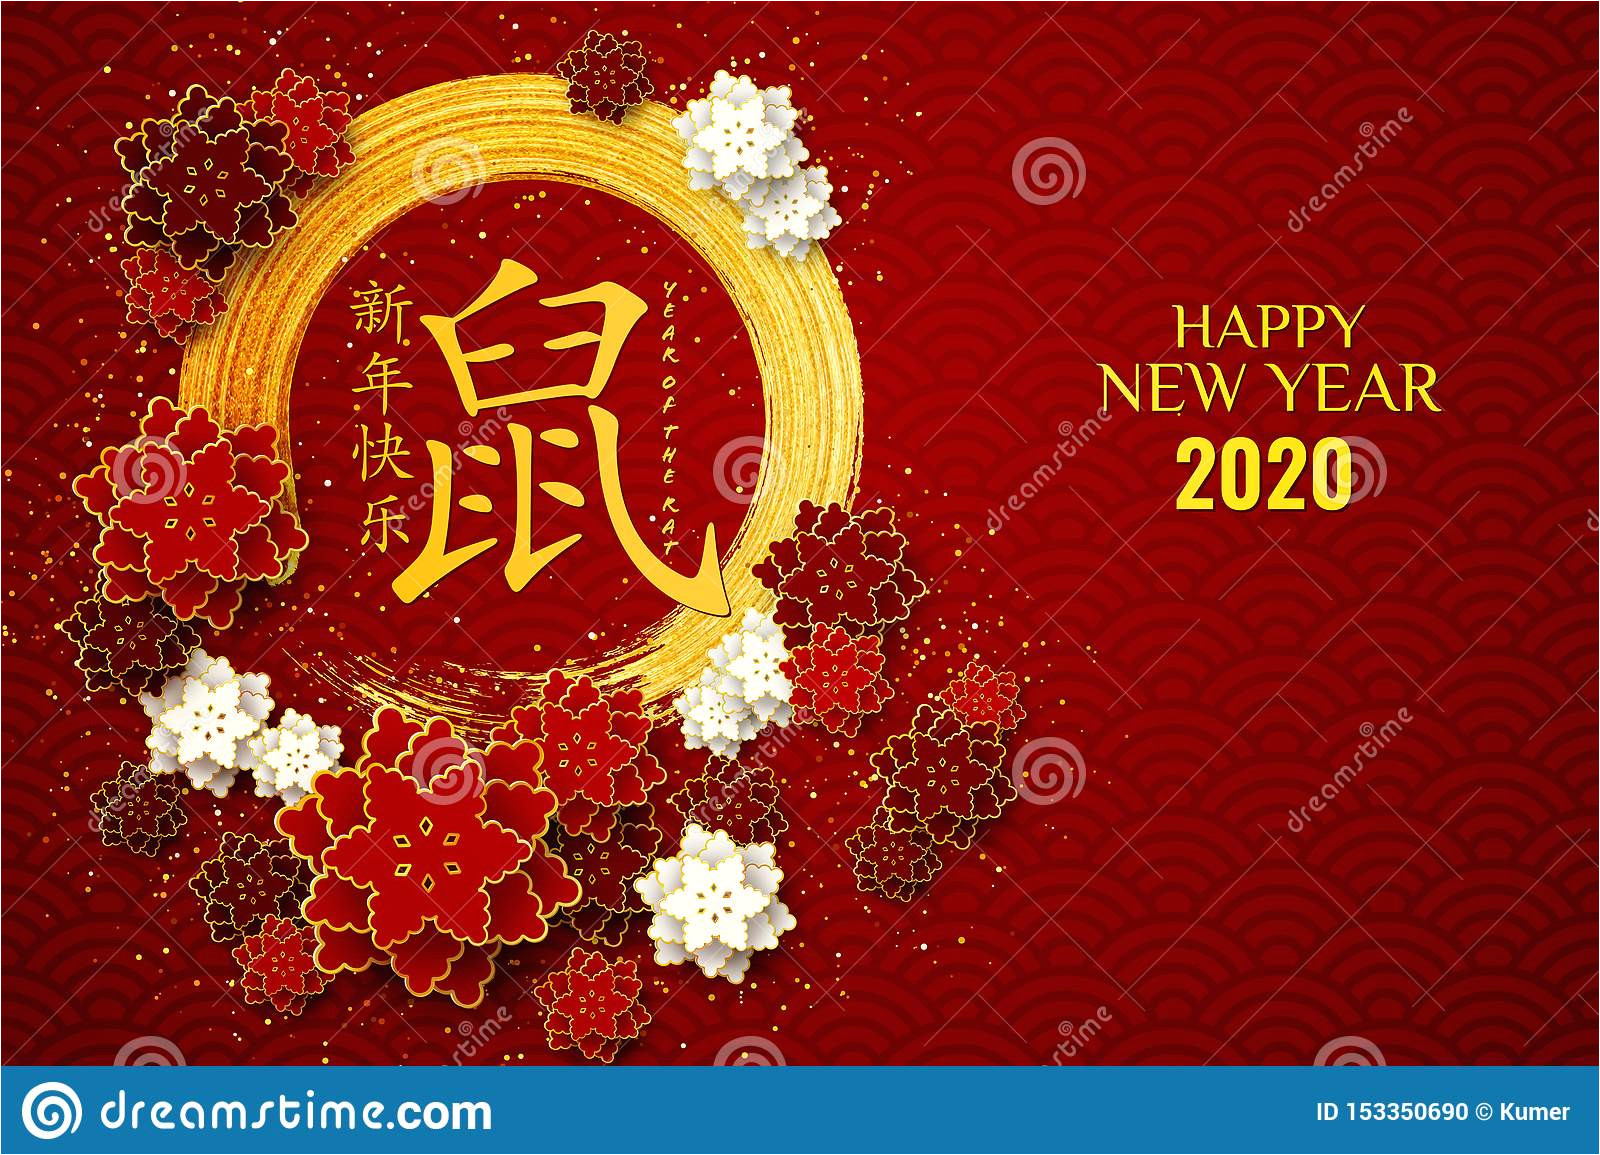 happy chinese new year red greeting card traditional asian flowers banner vector lunar background gold brush stroke circle 153350690 jpg